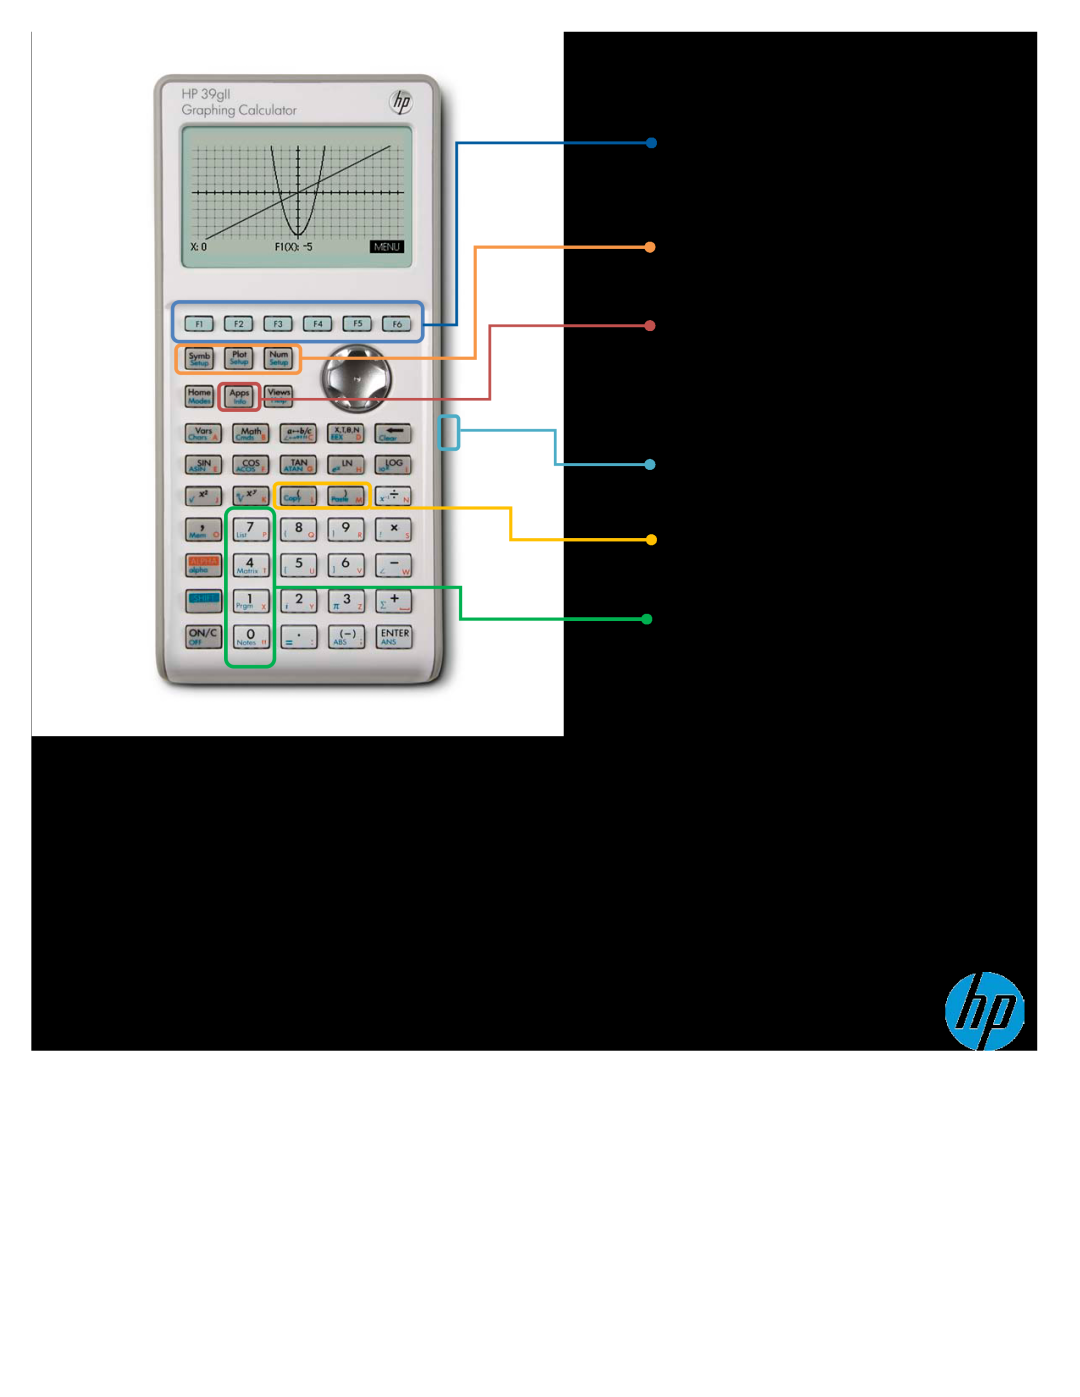 HP 39gII Graphing Context-sensitive Menu Keys to streamline entry, Efficiently copy and paste functions and calculations 